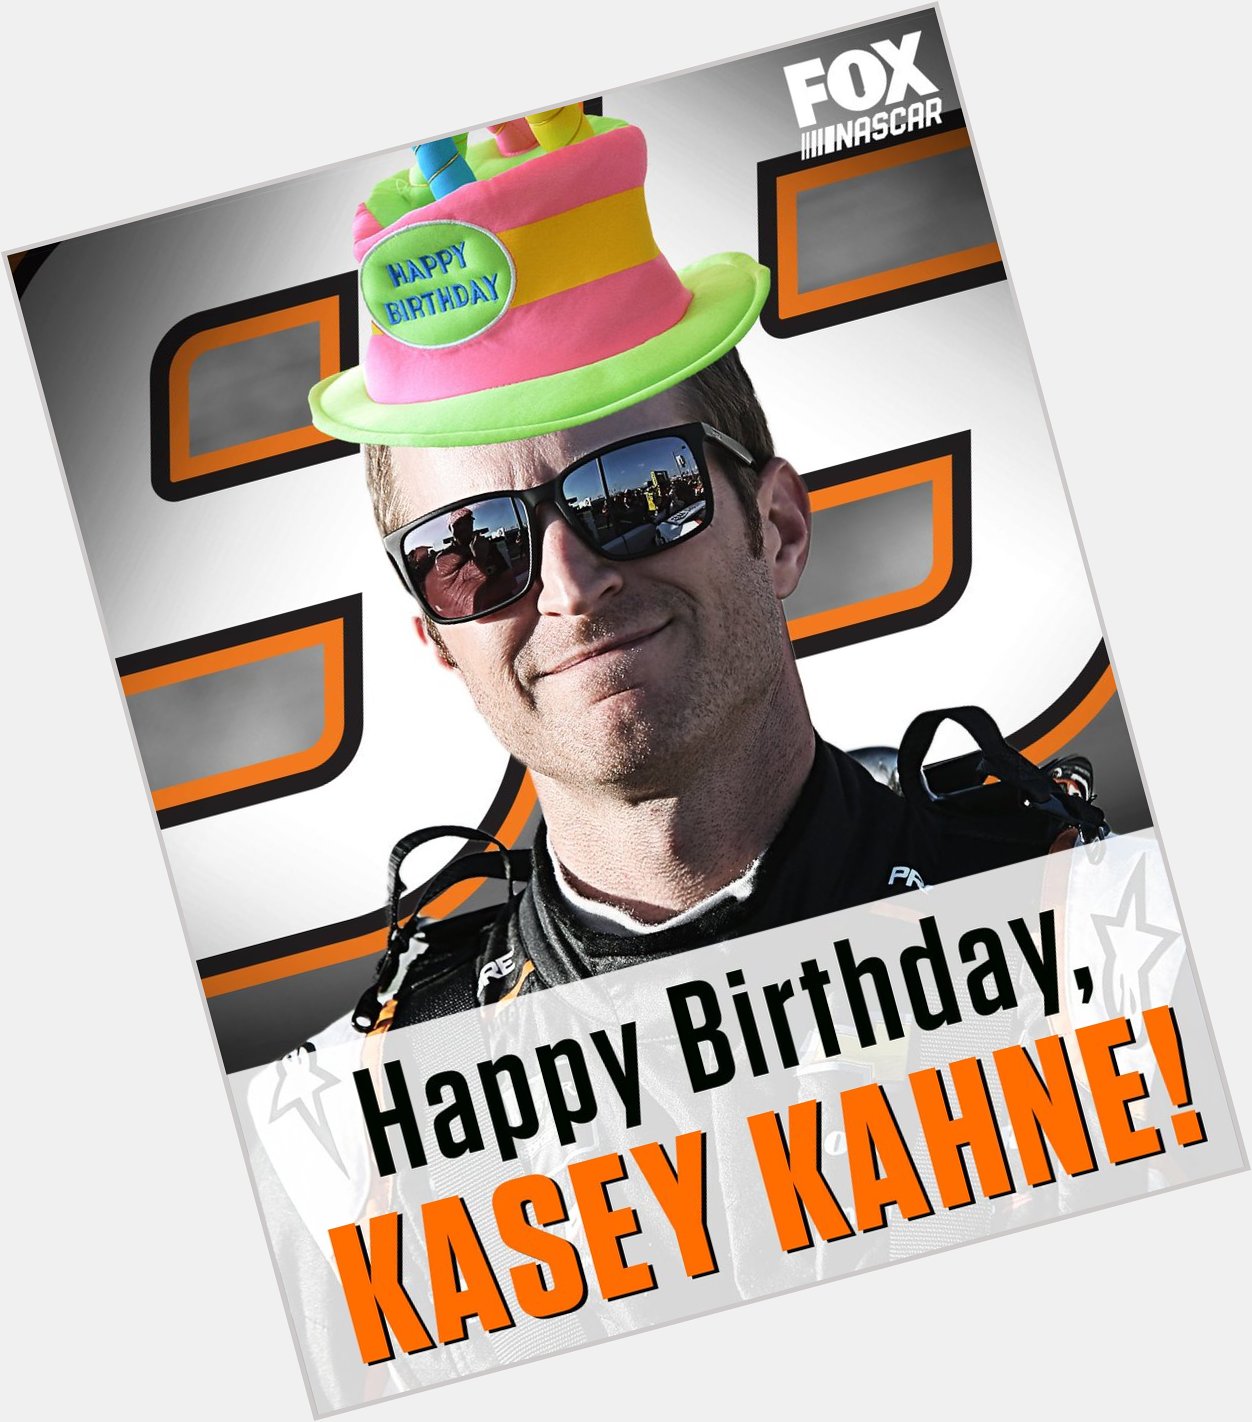 Remessage to help us wish Kasey Kahne a very Happy Birthday (and ... yes, the hat was added via Photoshop )! 